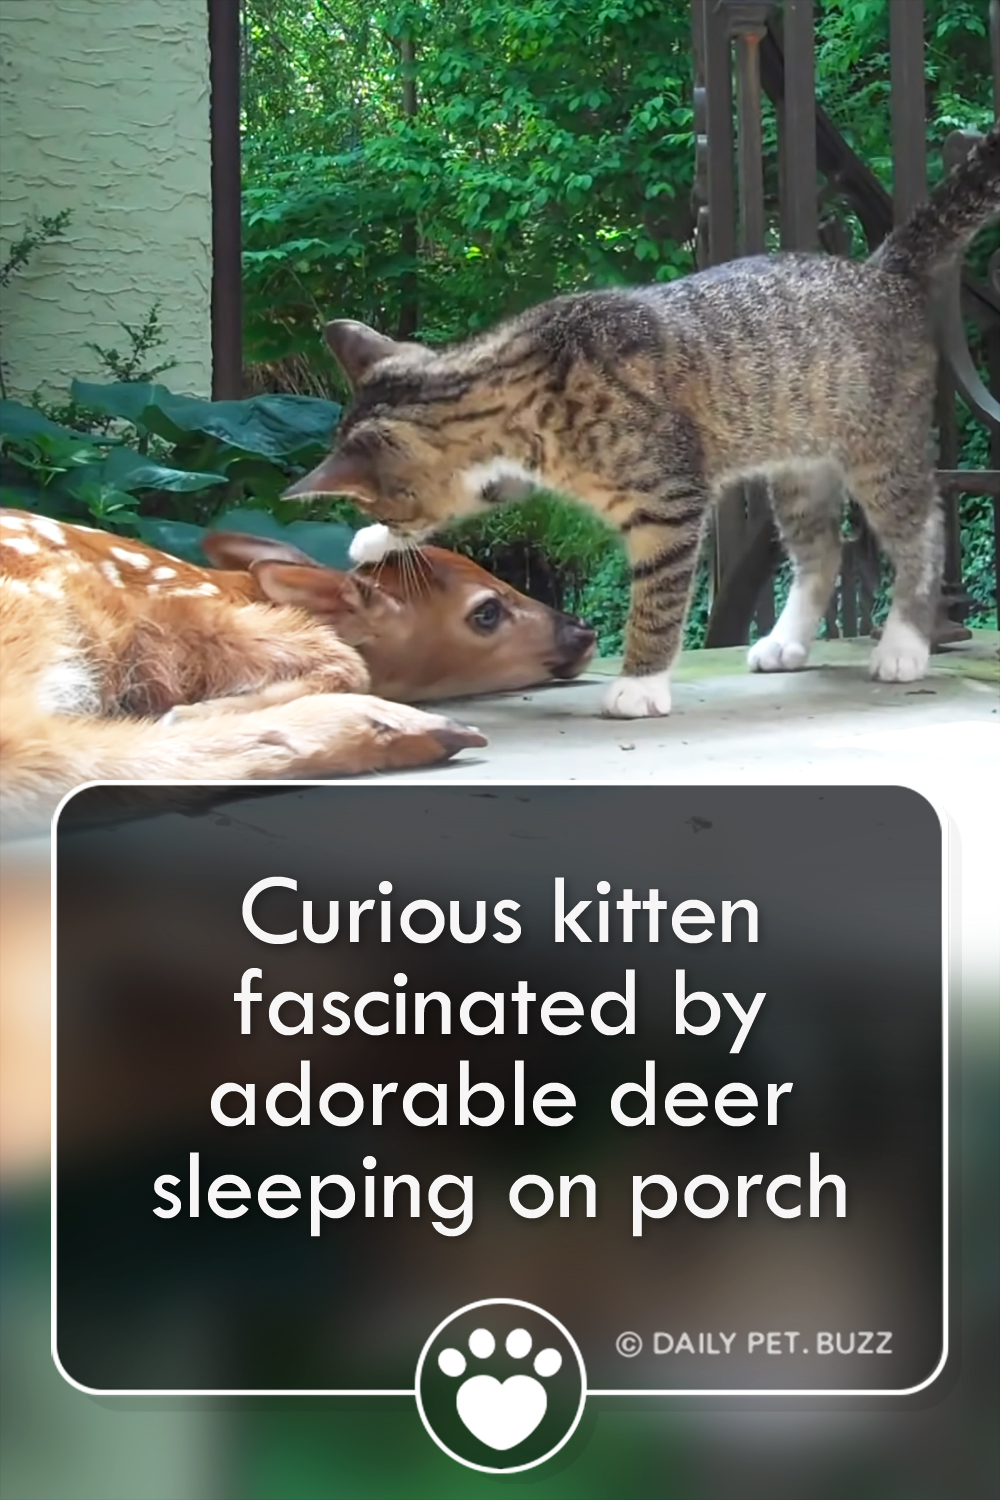 Curious kitten fascinated by adorable deer sleeping on porch